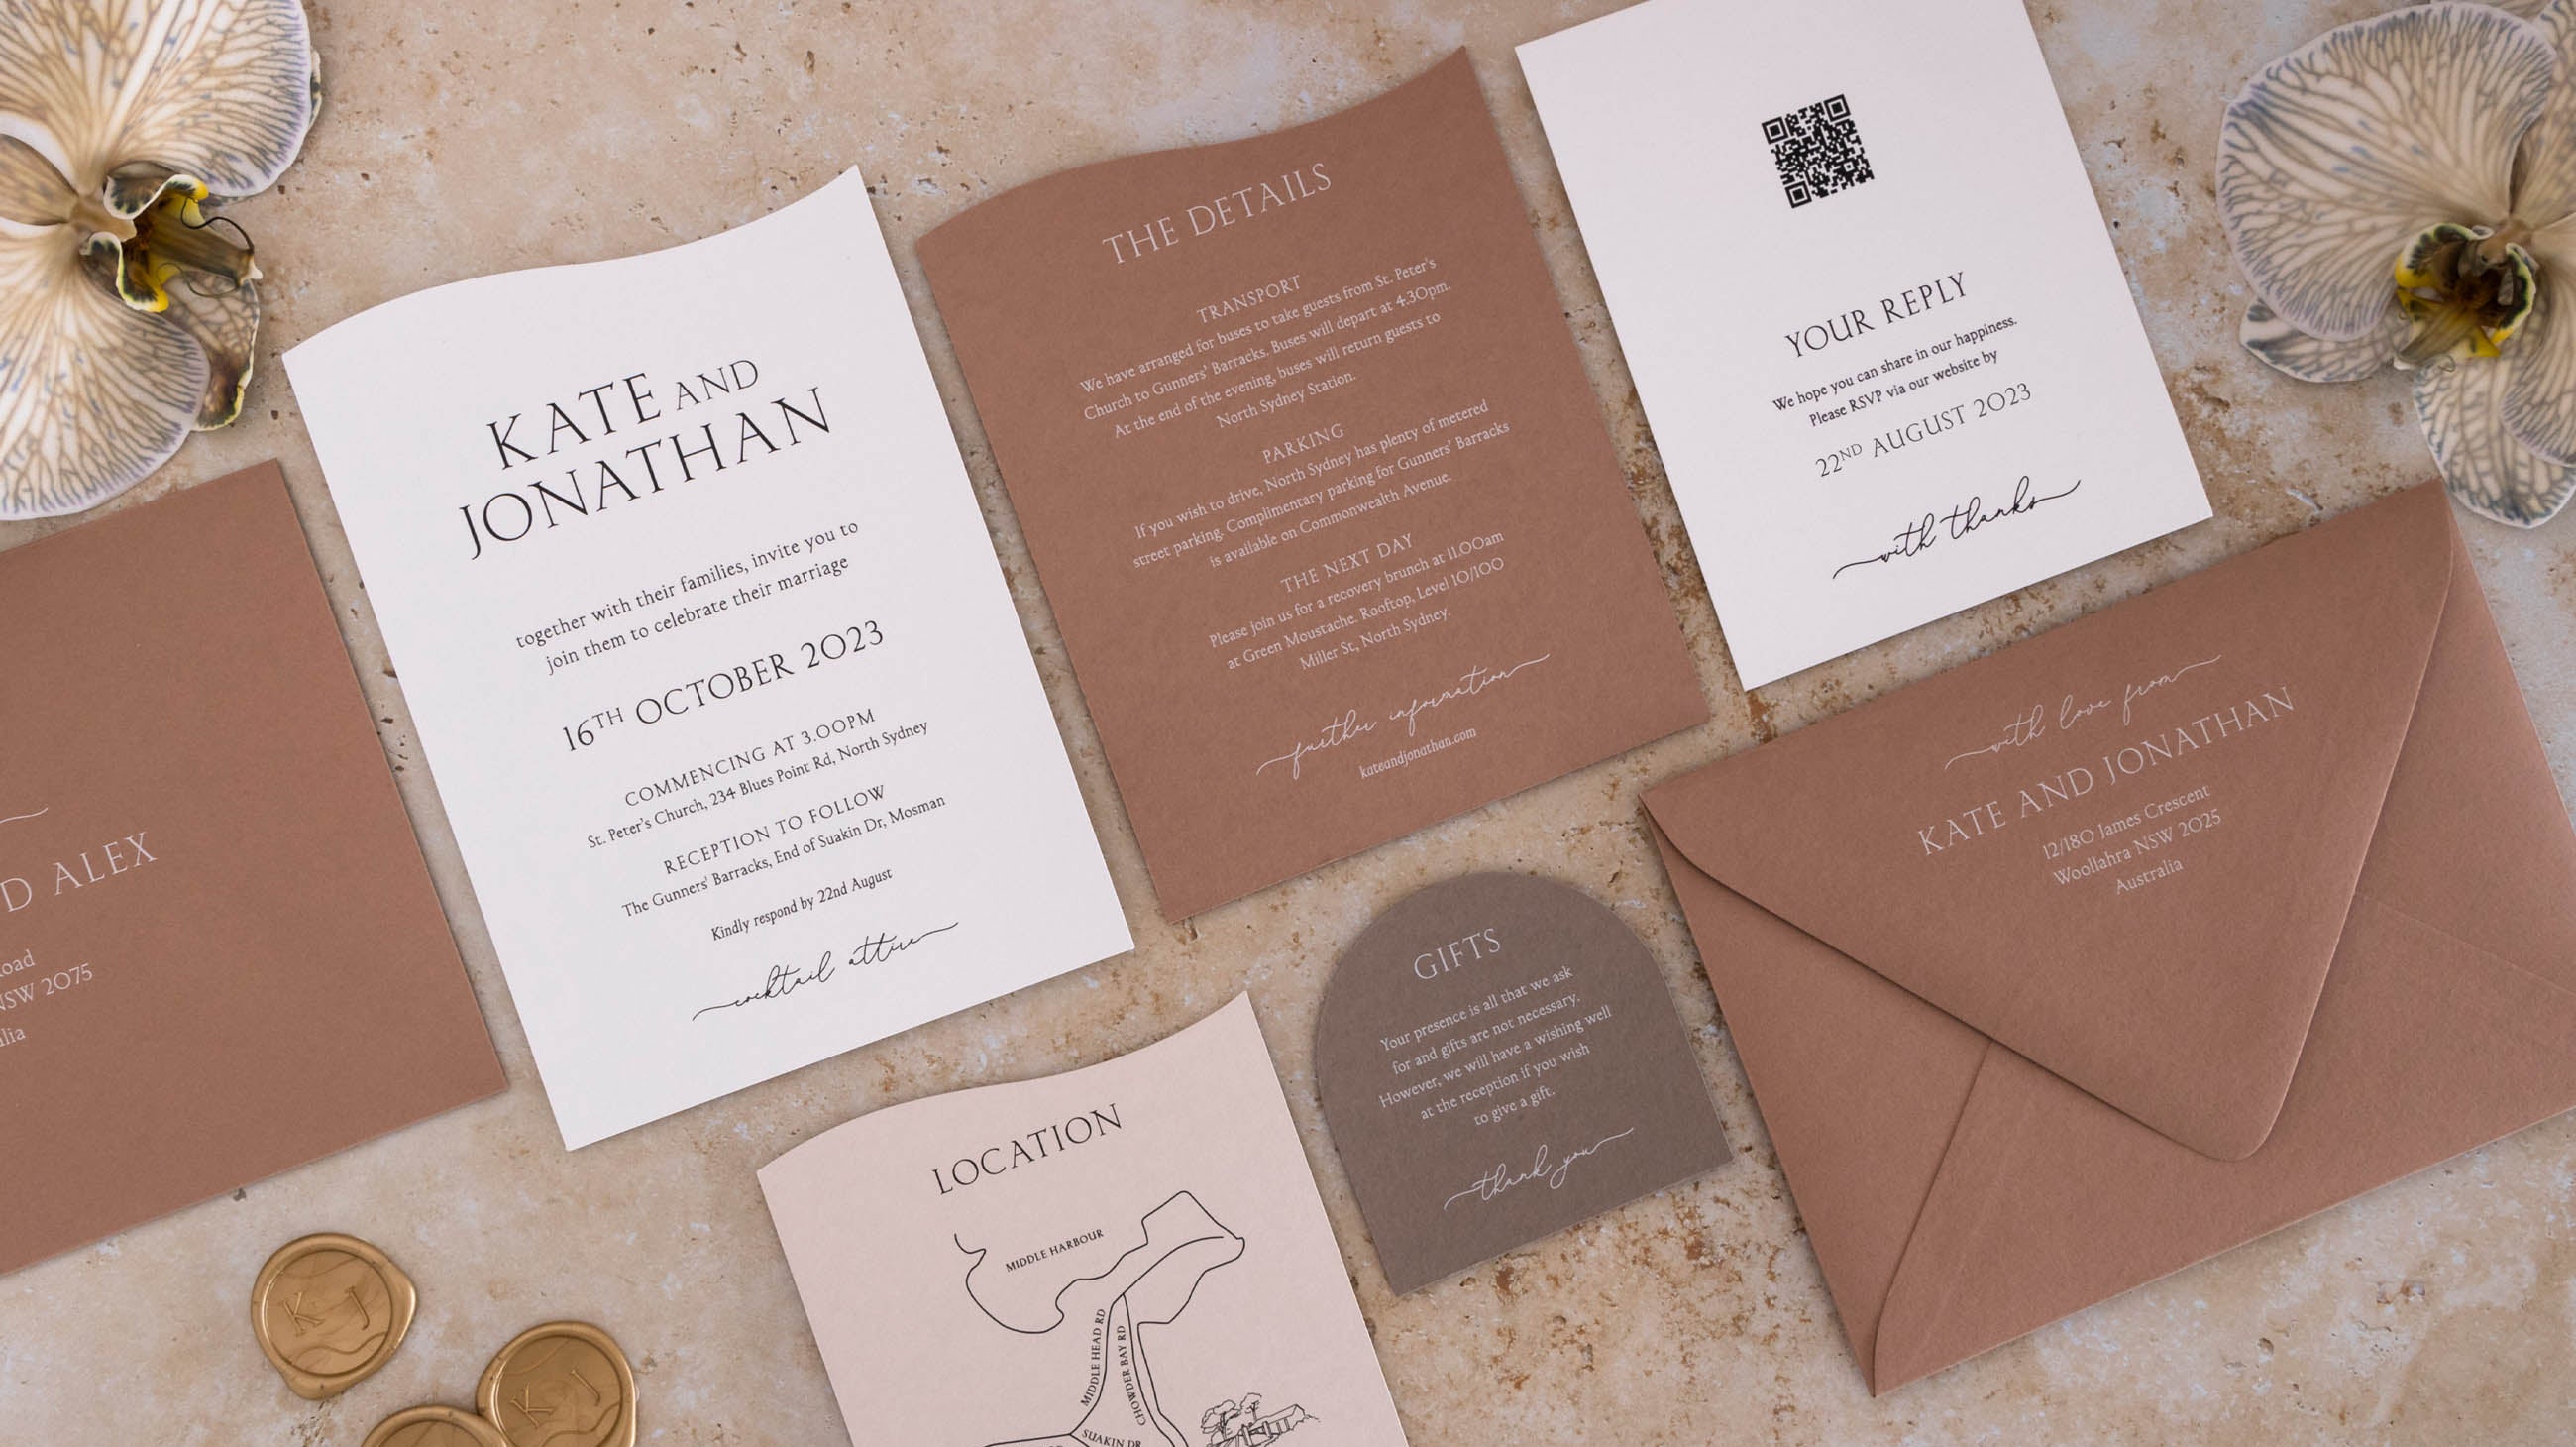 How to word wedding invitations: all you need to know